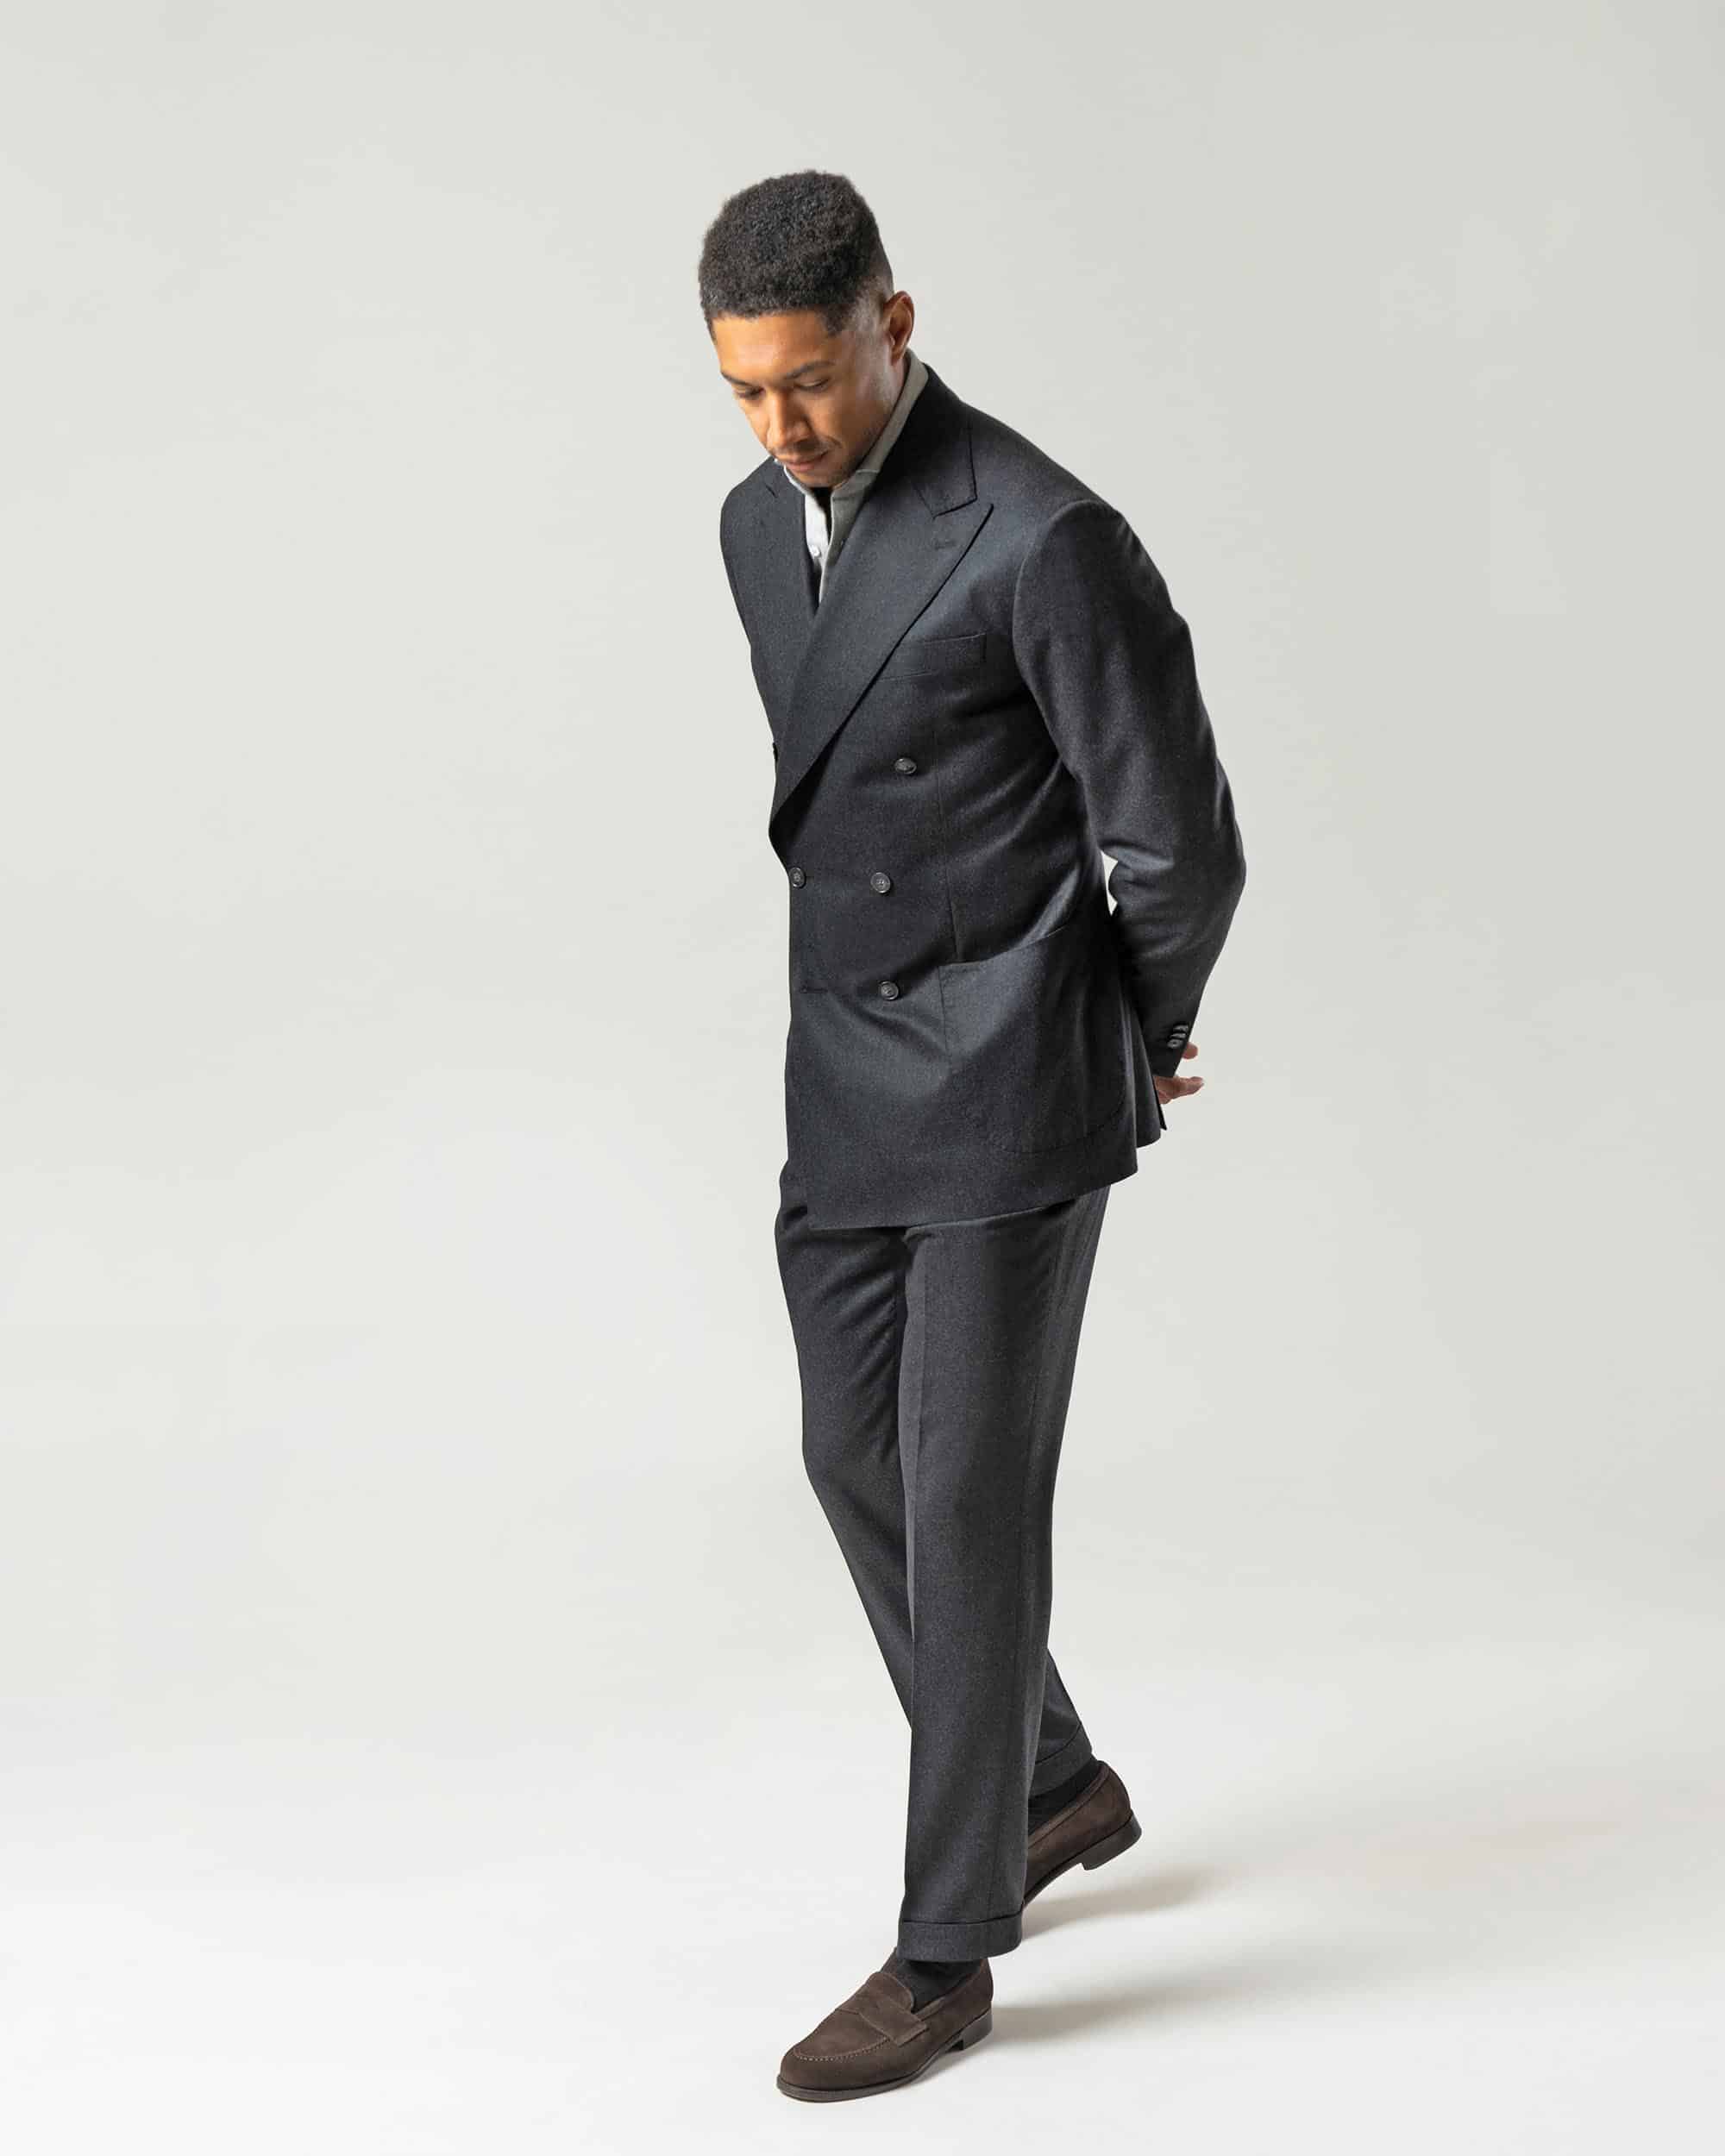 Suit flannel charcoal grey image 1